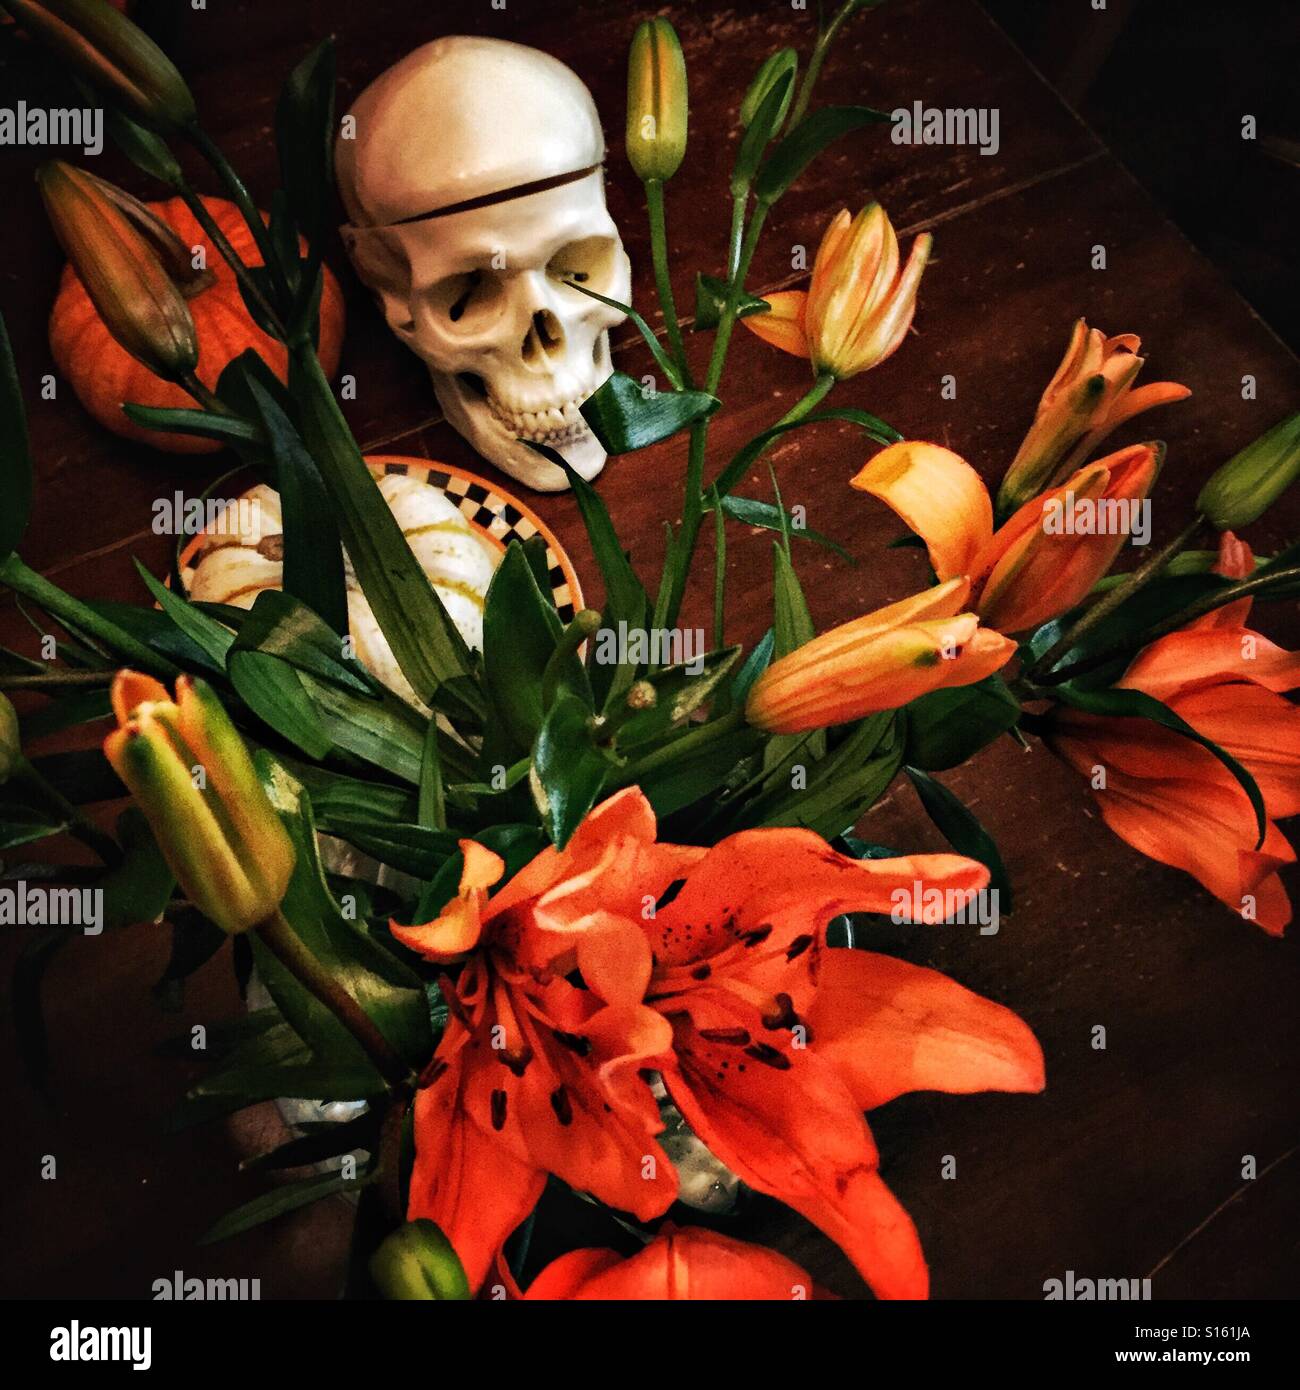 A bouquet of orange lilies and a skull decorate a tabletop for Halloween. Stock Photo